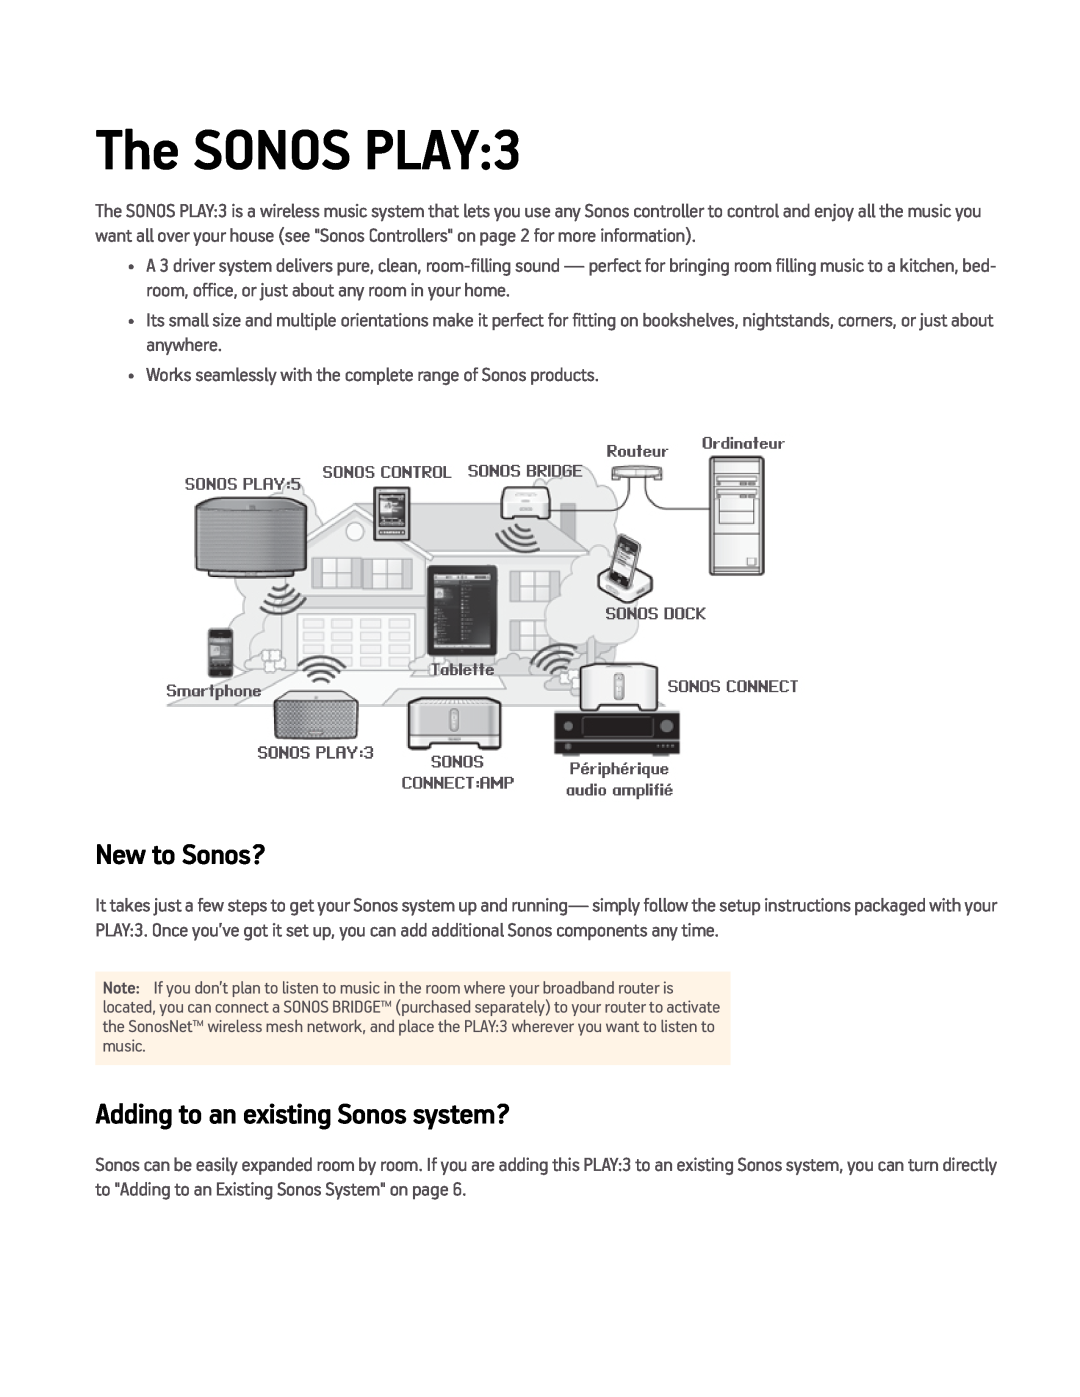 Sonos PLAY3US1BLK manual New to Sonos?, Adding to an existing Sonos system?, The SONOS PLAY 